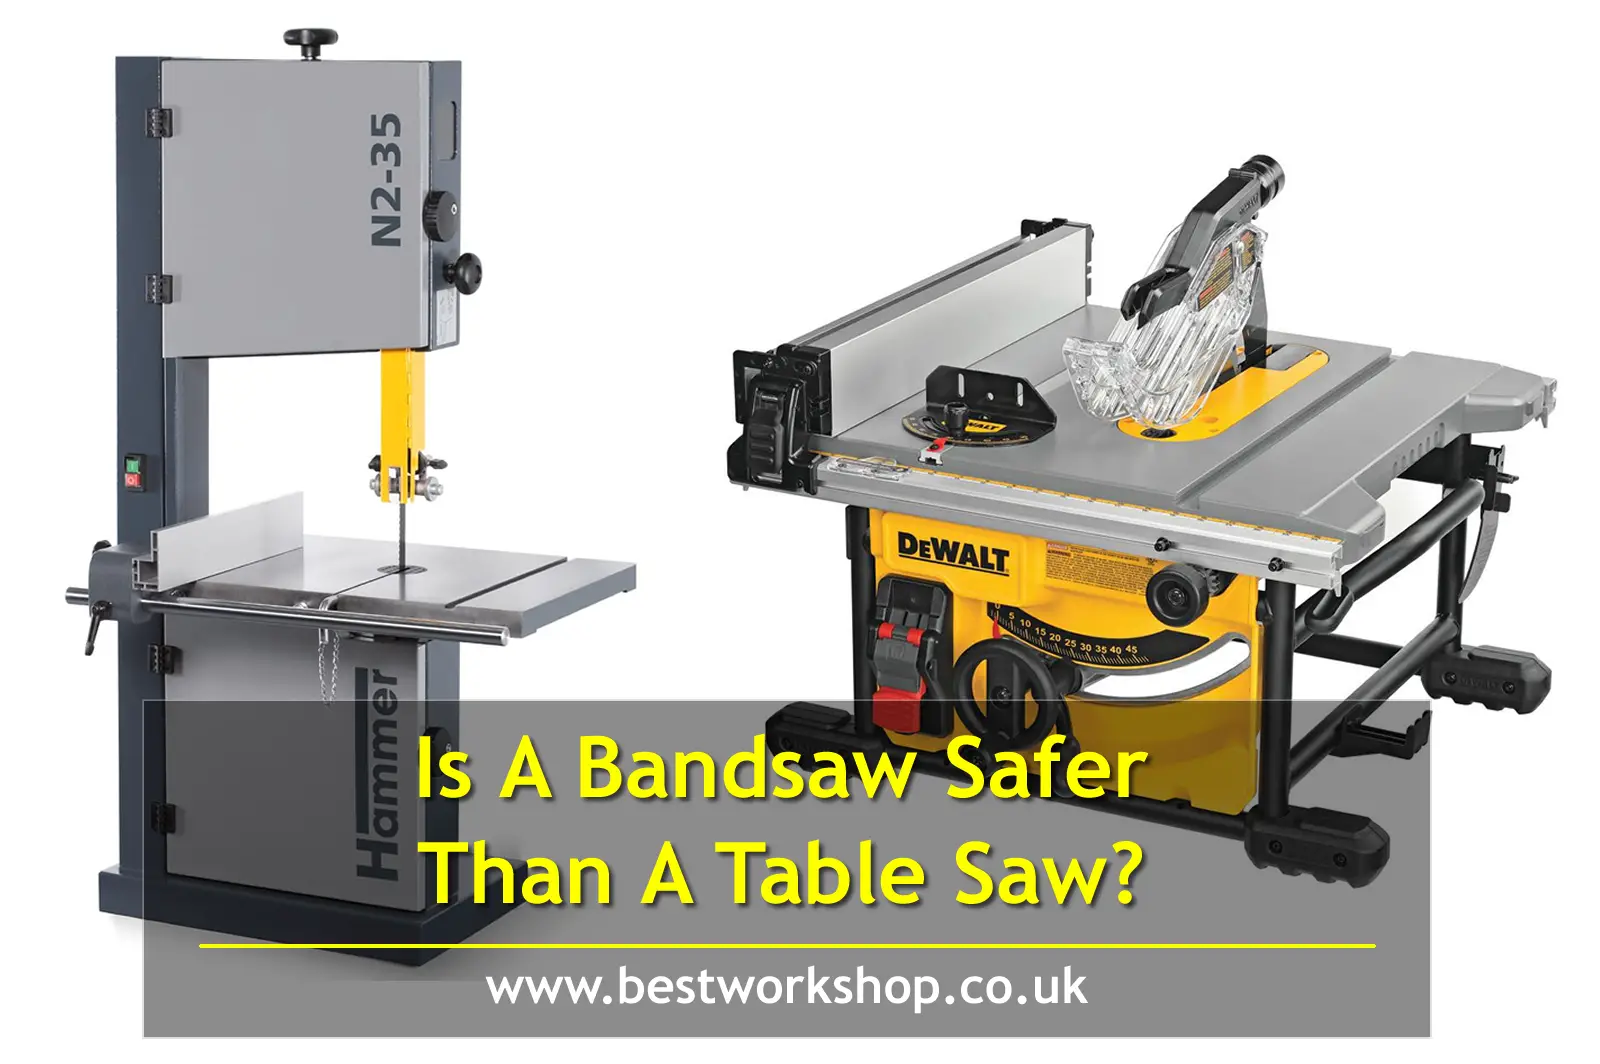 Is a bandsaw safer than a table saw?